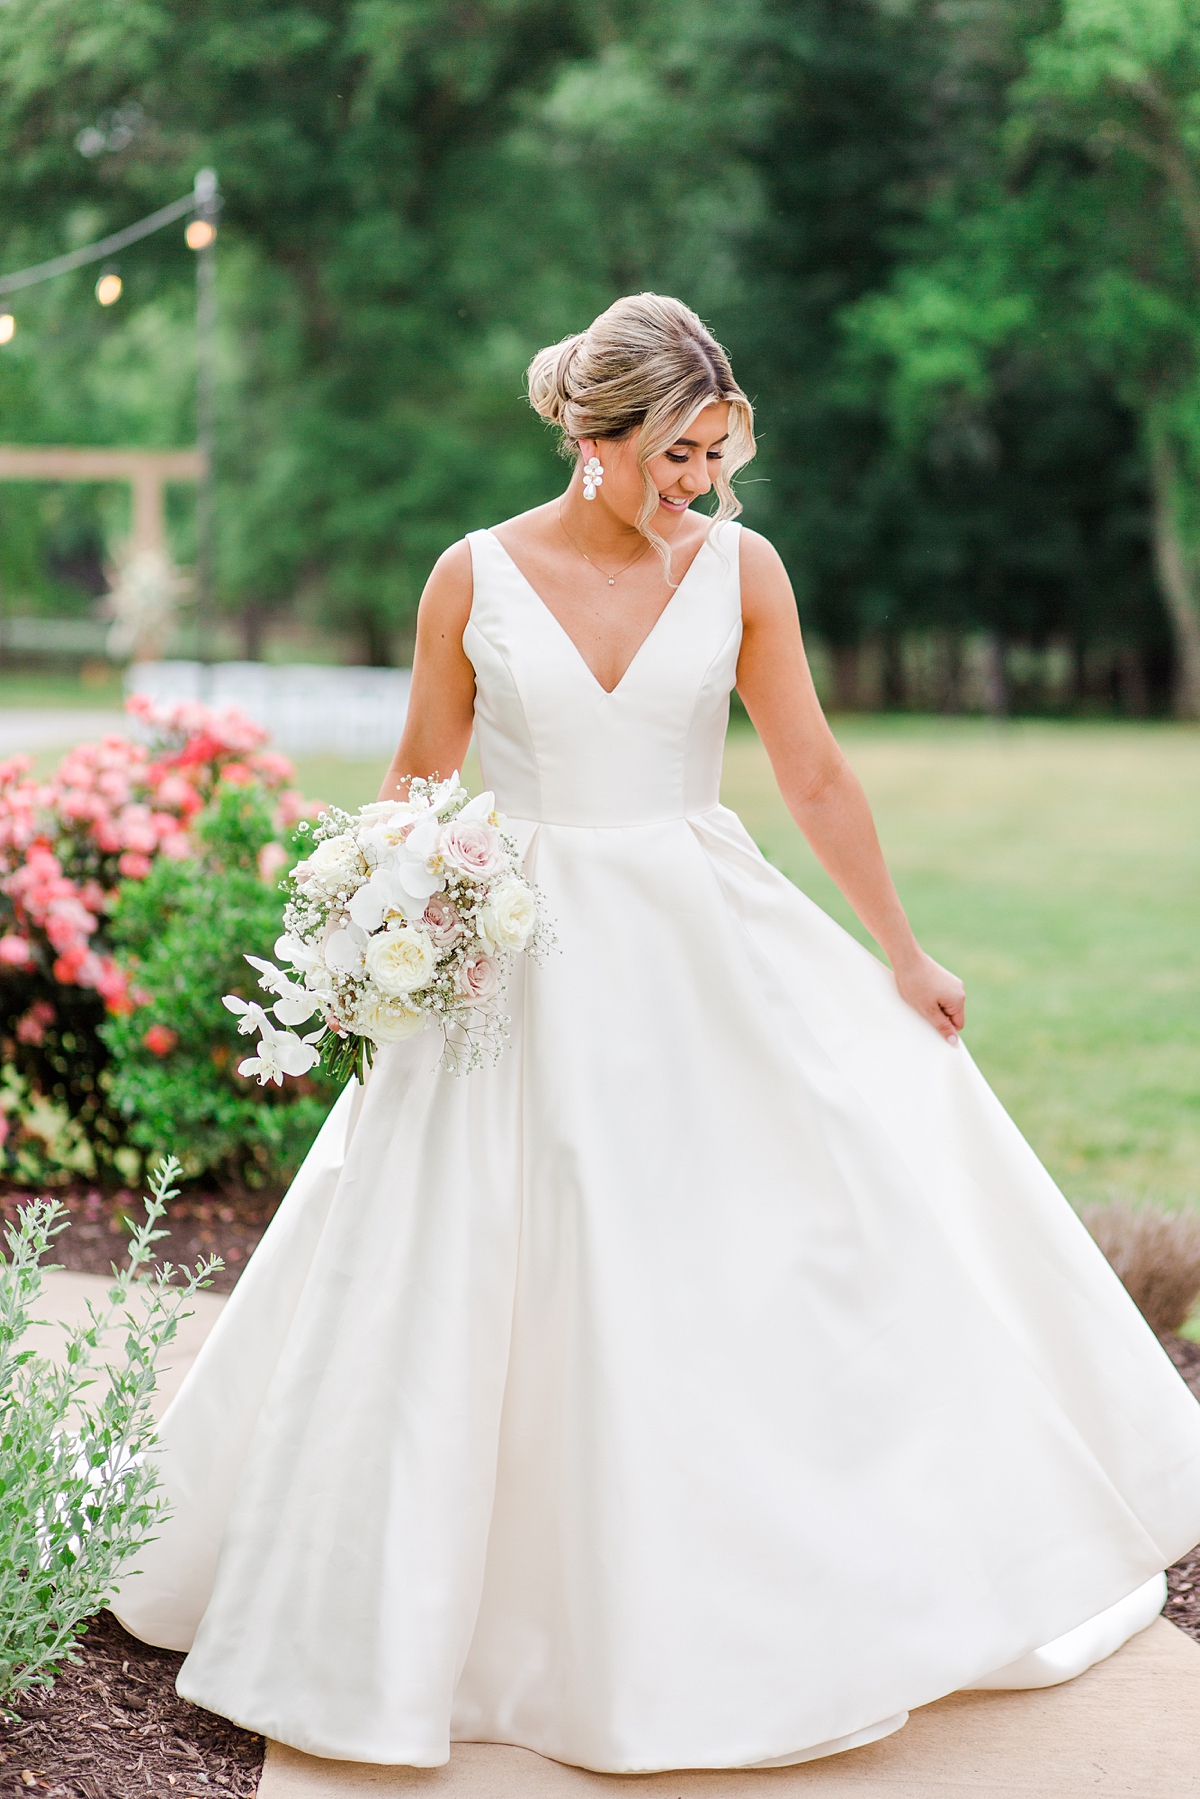 Bridal Portraits During Spring Oakdale Wedding. Wedding Photography by Richmond Wedding Photographer Kailey Brianne Photography. 